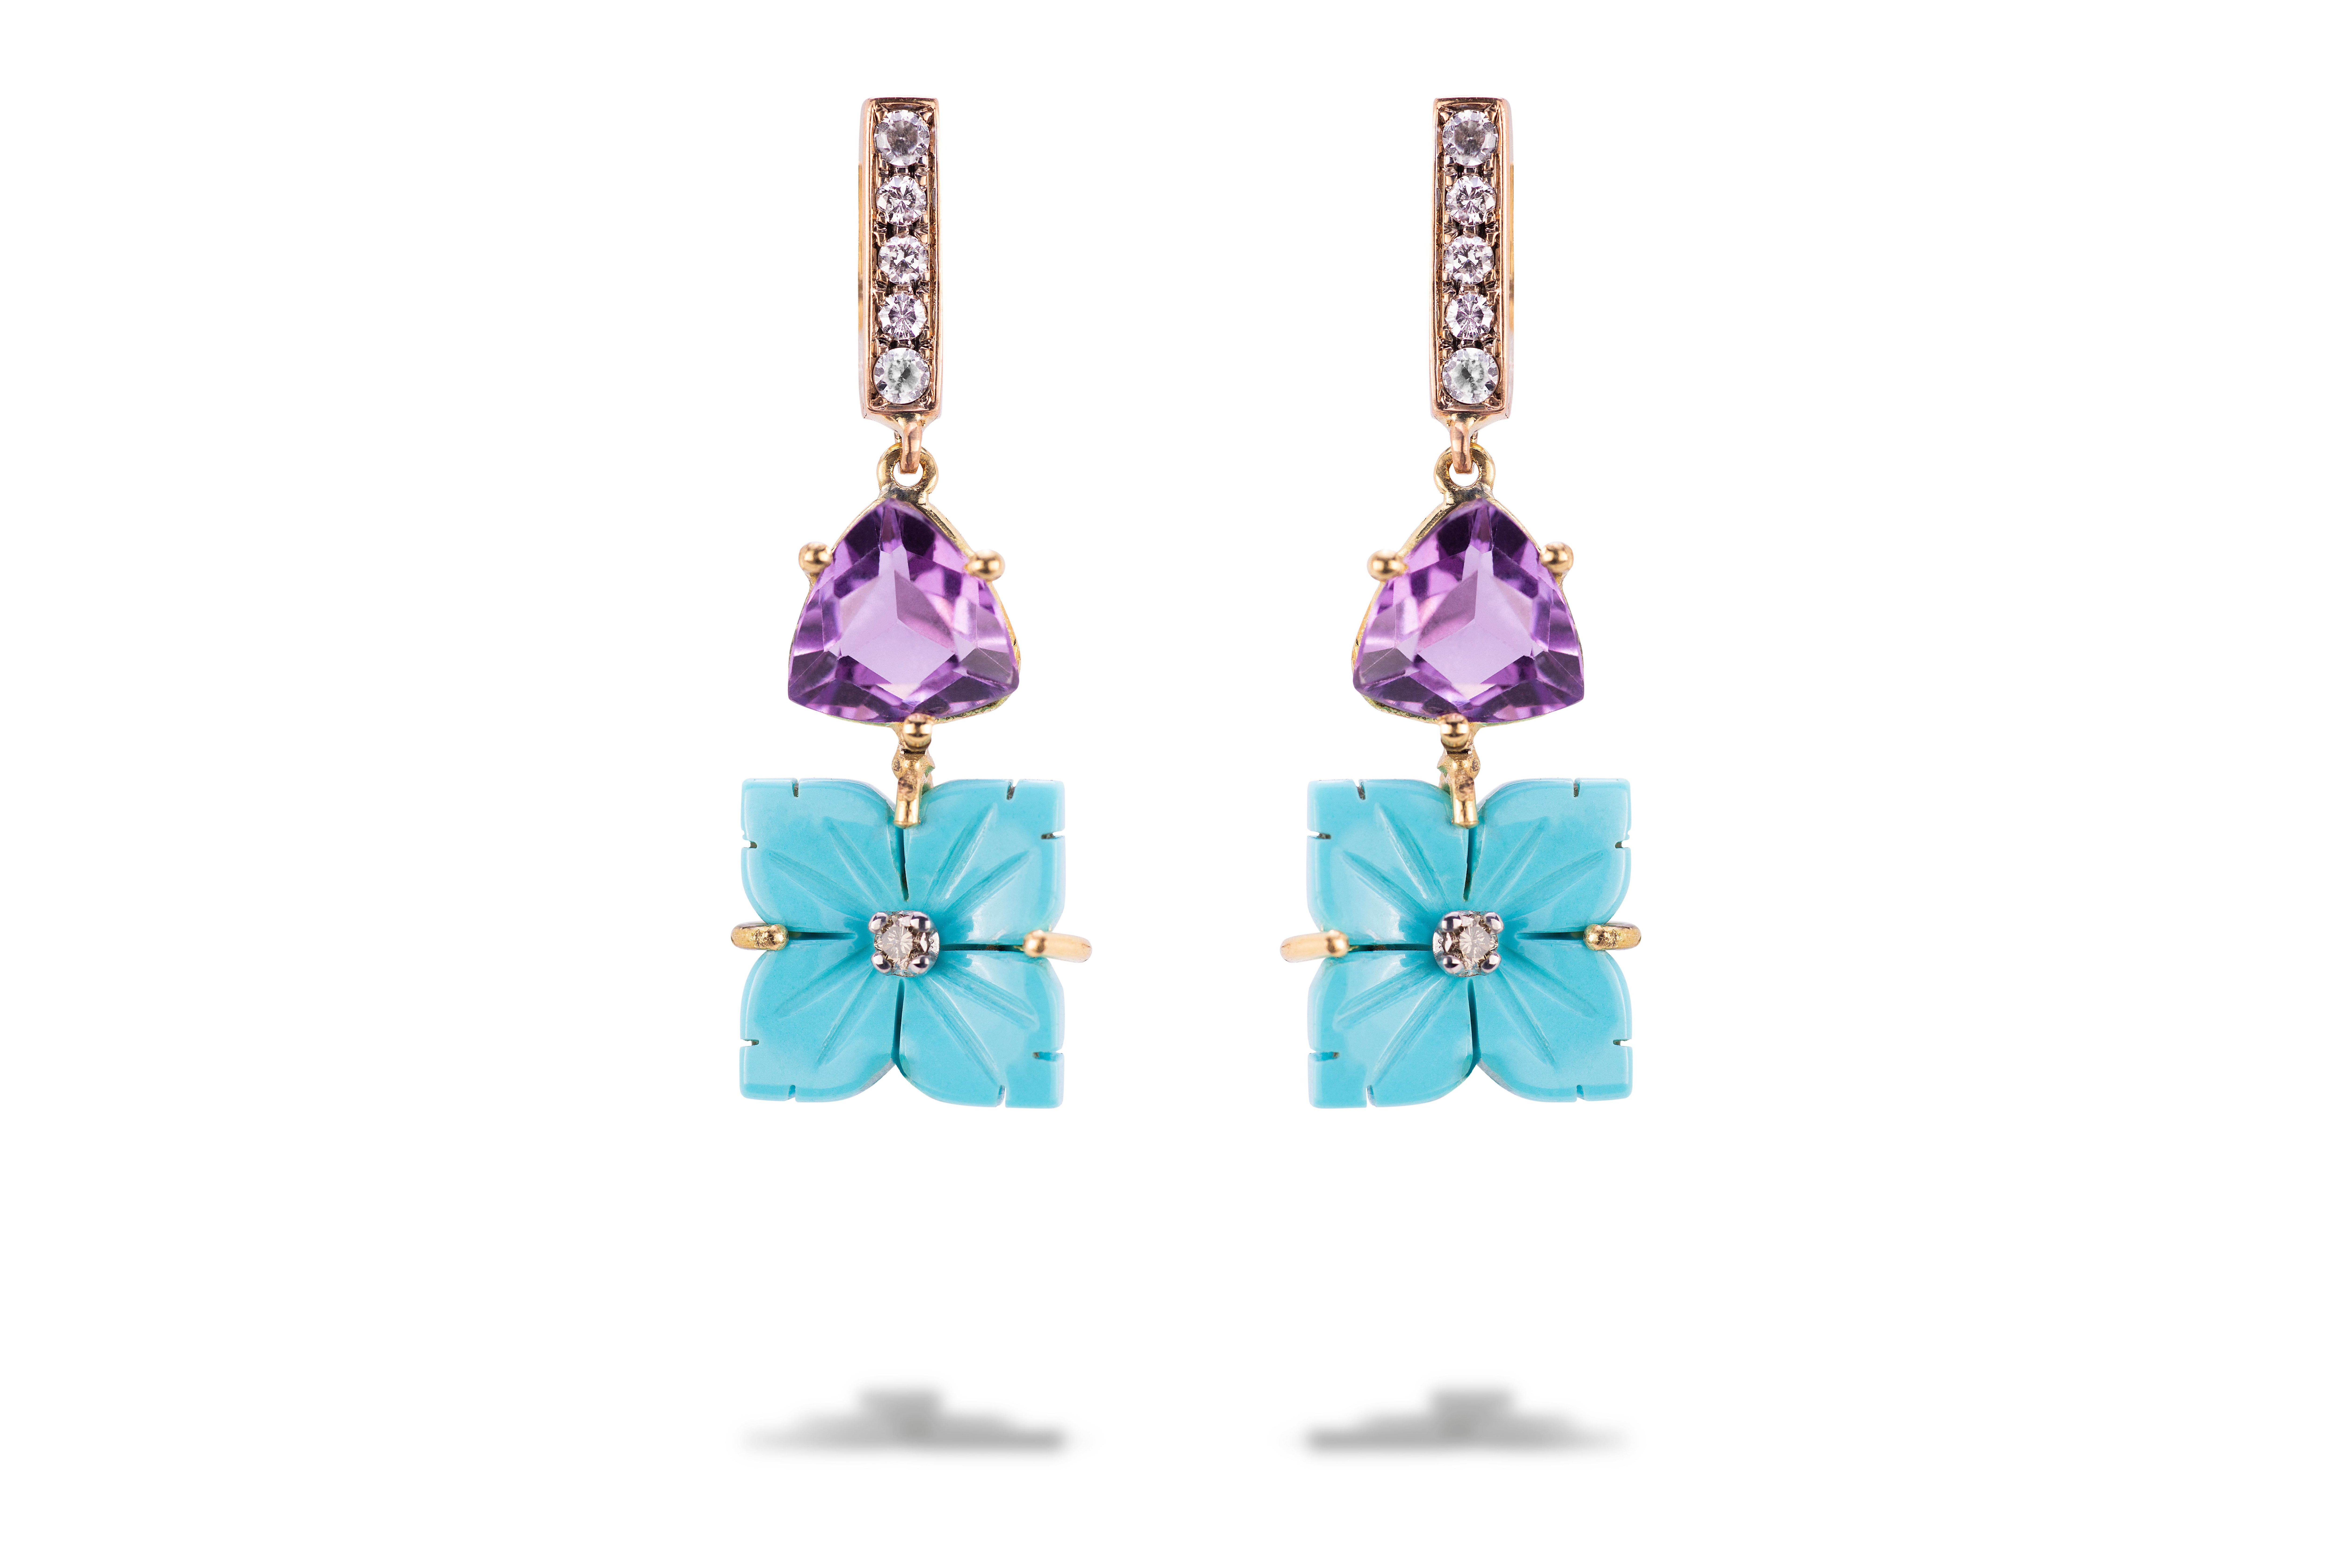 Introducing the exquisite handcrafted dangle earrings by Rossella Ugolini, a true testament to Italian craftsmanship. These earrings feature a captivating combination of 18k yellow gold and precious gemstones that evoke the vibrant colors of